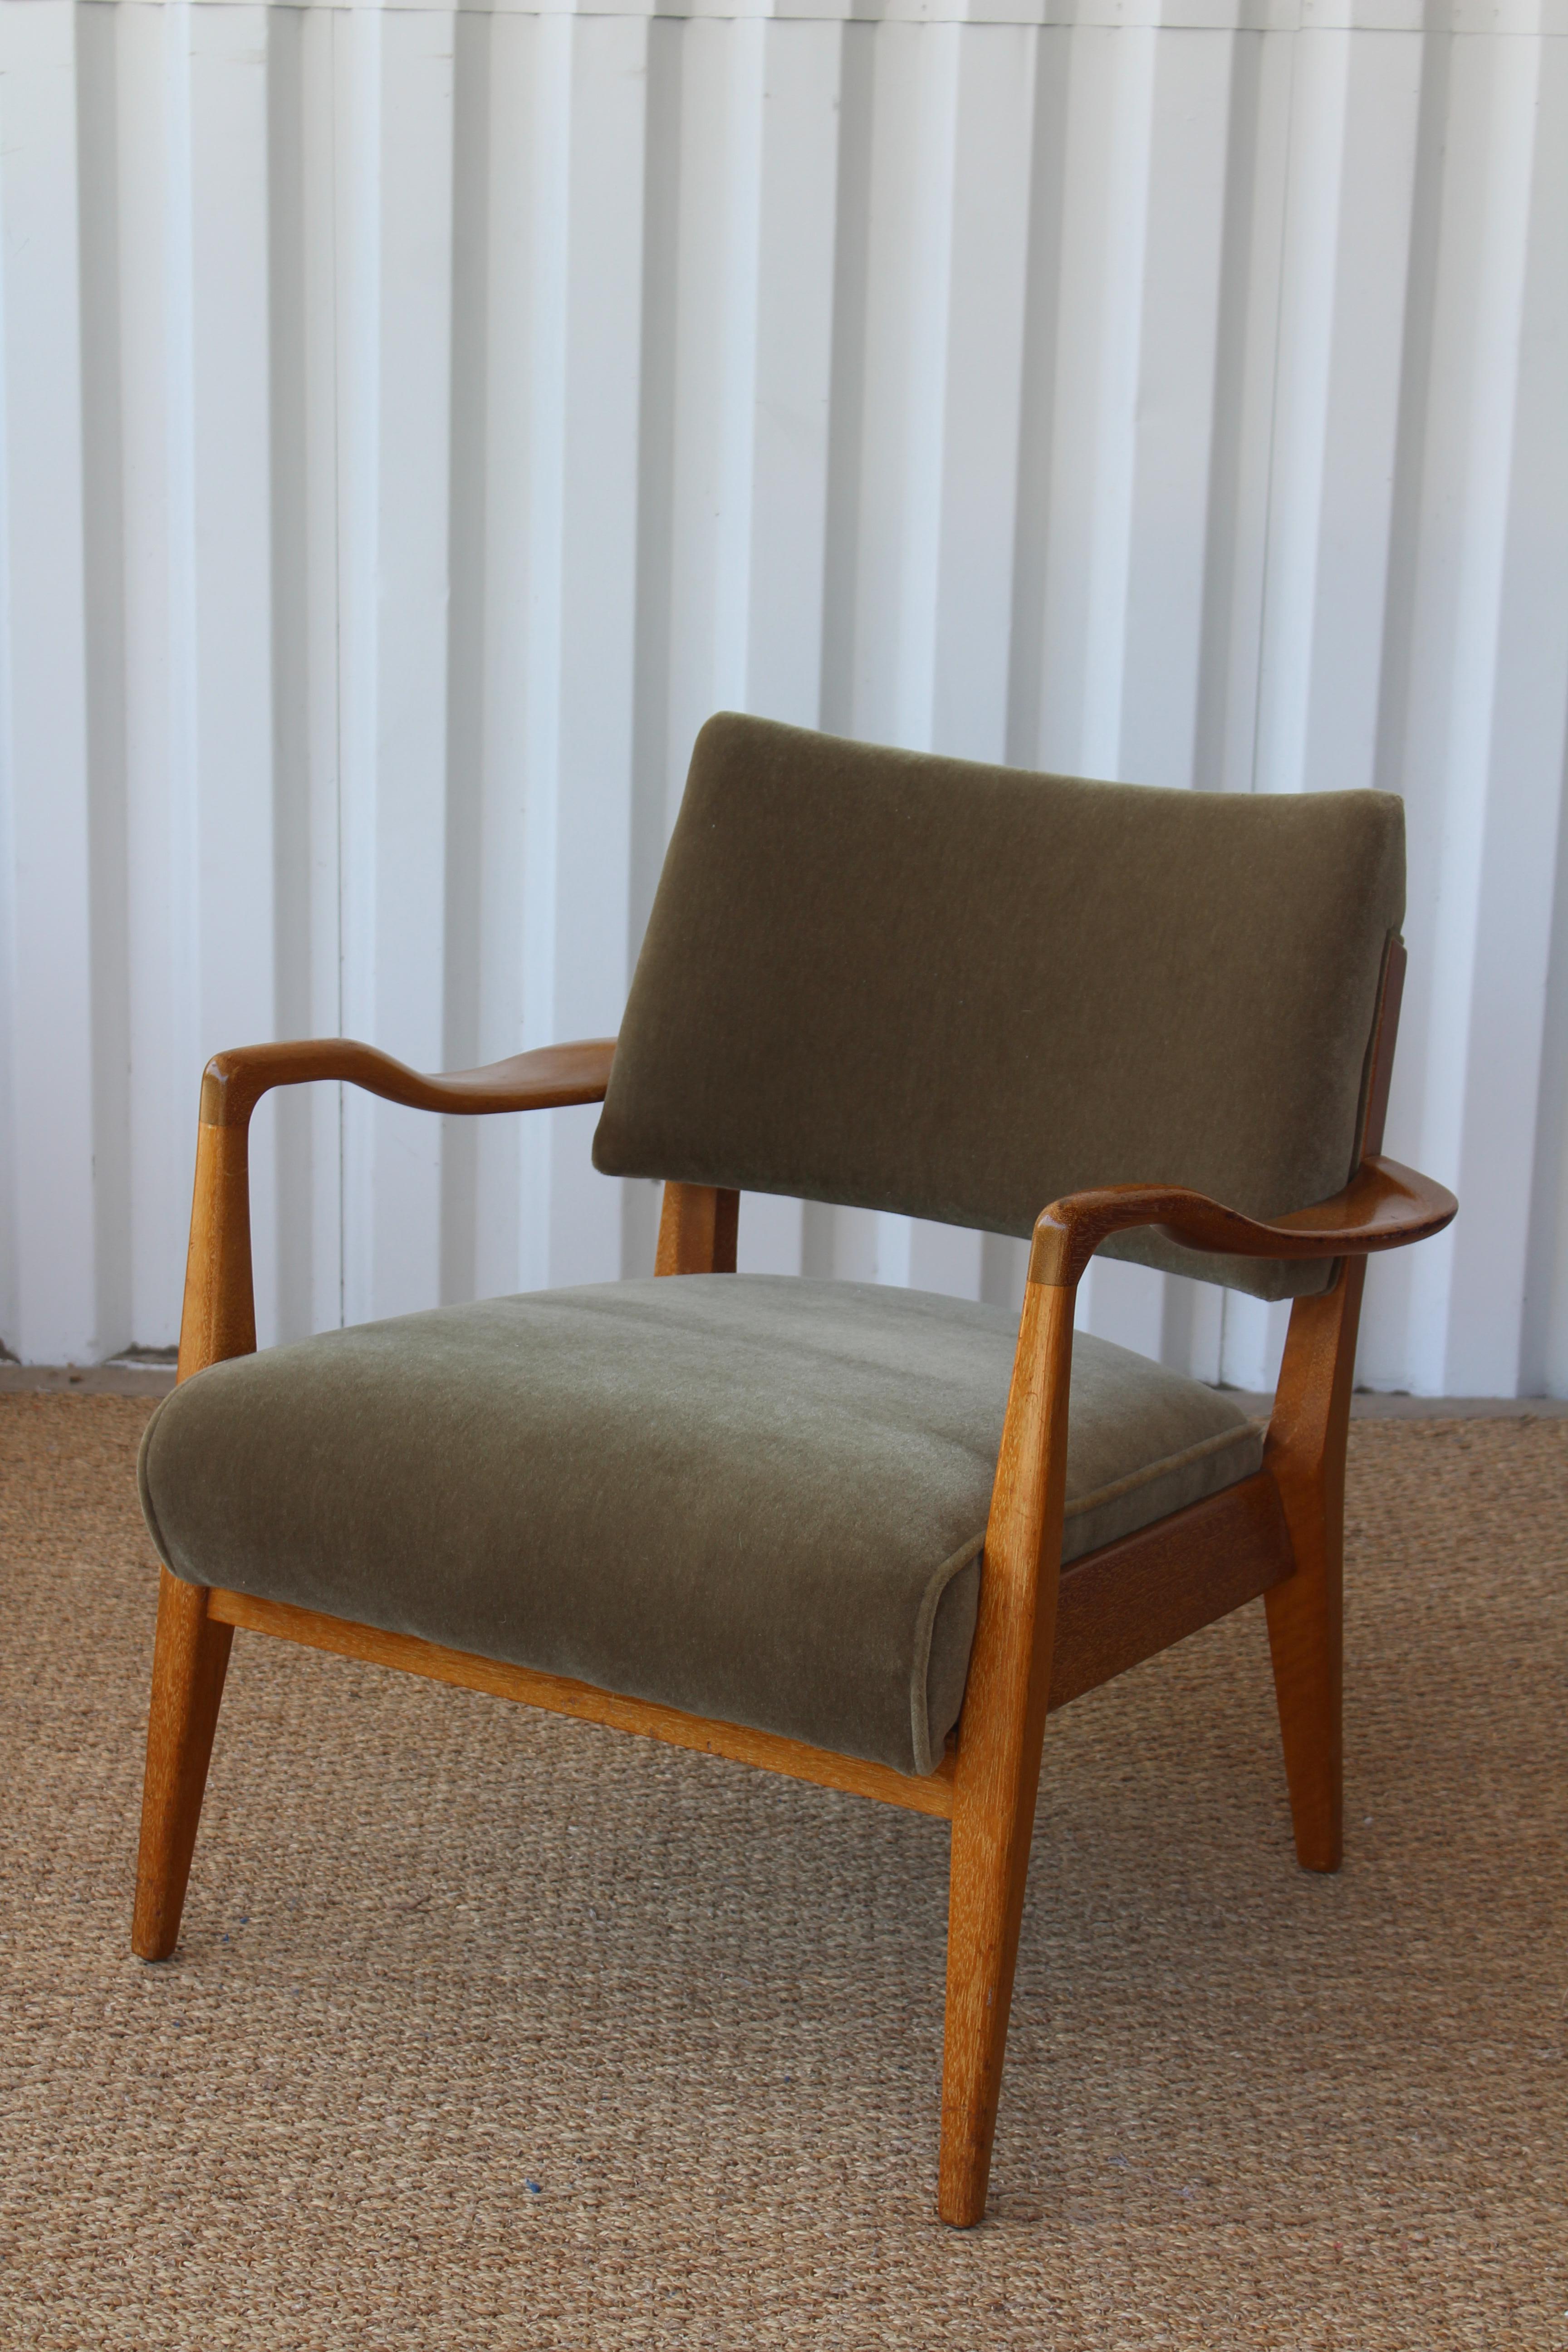 Mid-Century Modern lounge chair designed by Paul Laszlo for Brown Saltman, U.S.A, 1950s. The frame is solid mahogany in an almost cerused like finish. Beautiful sculpted arms. Newly upholstered in an olive green Italian wool mohair. Frame shows